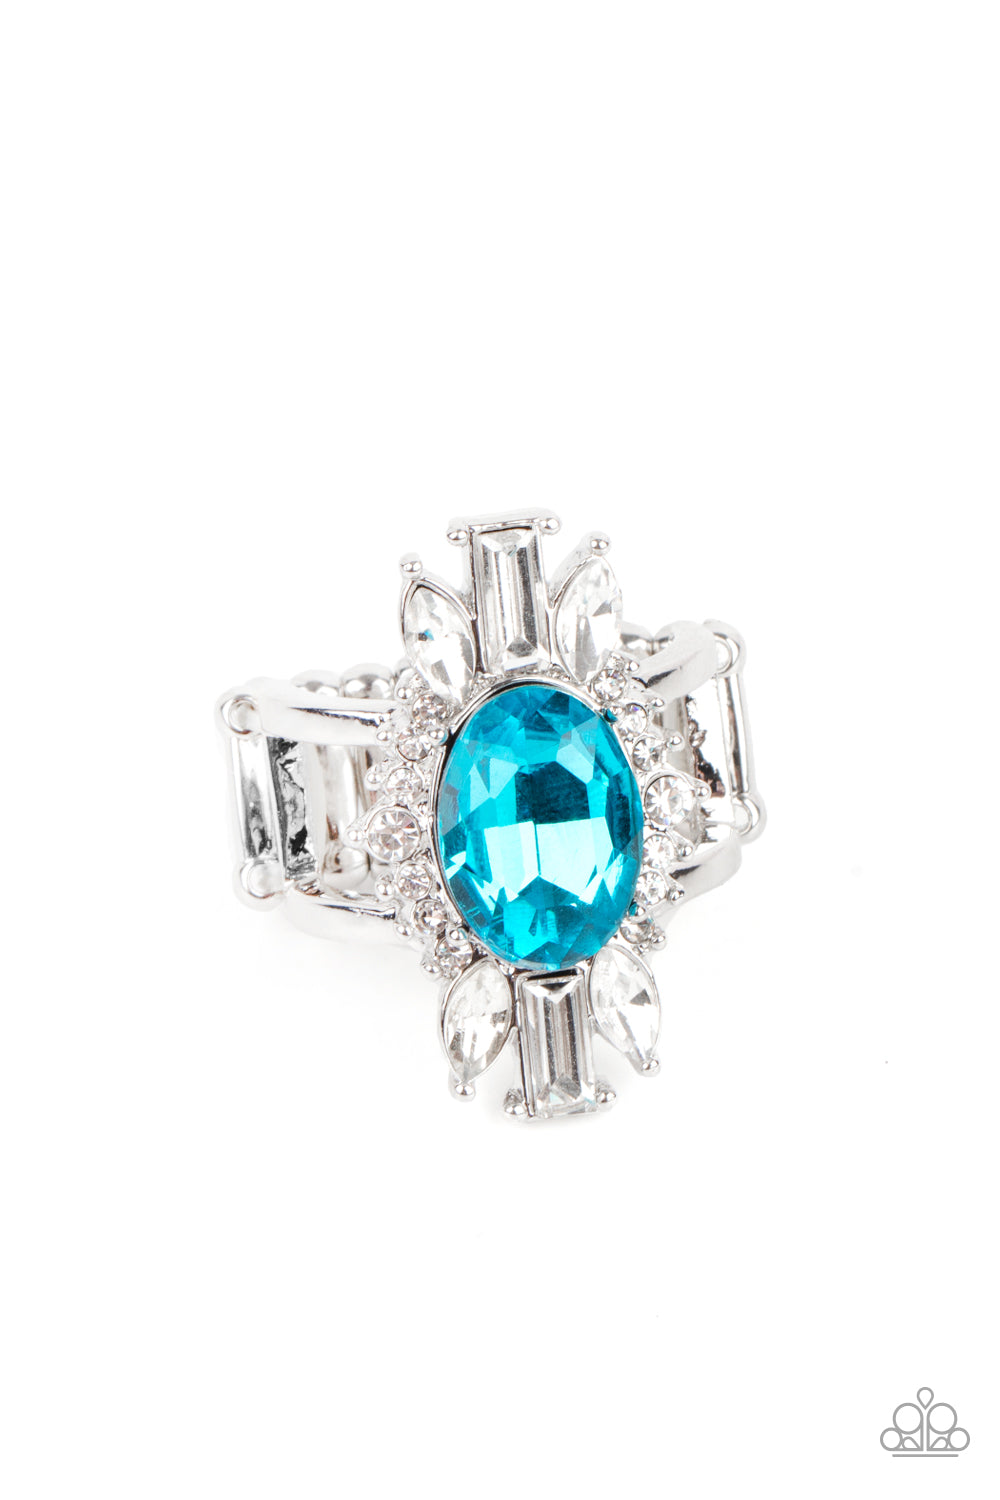 An icy collection of round, marquise, and emerald style white rhinestones radiate out from a blue gem center, creating a glamorous centerpiece atop the finger. Features a stretchy band for a flexible fit.